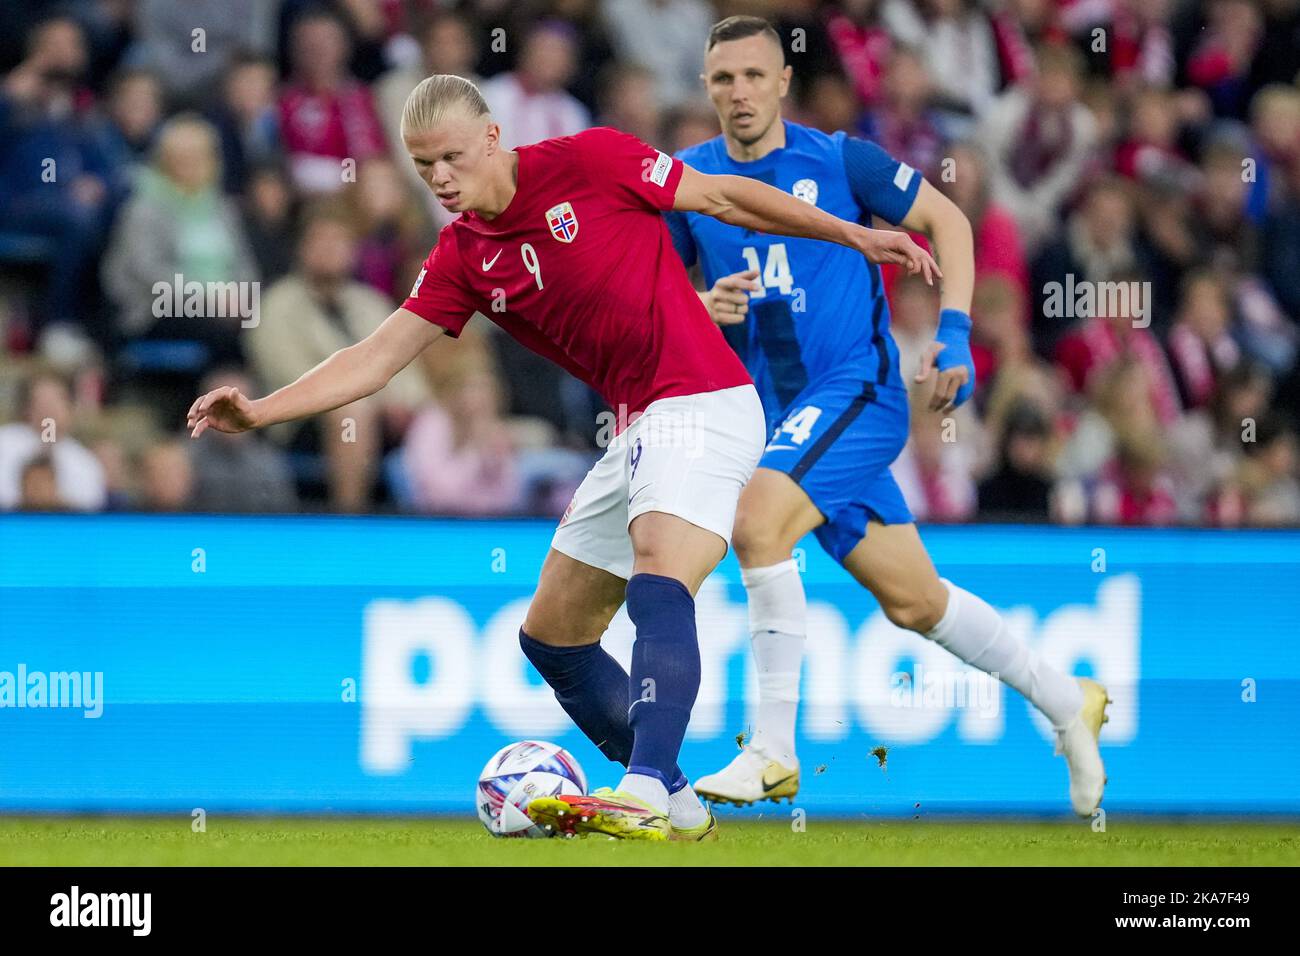 Oslo, Norway. 09th June, 2022. Erling Haaland (9) of Norway seen after the  UEFA Nations League match between Norway and Slovenia at Ullevaal Stadion  in Oslo. (Photo Credit: Gonzales Photo/Alamy Live News